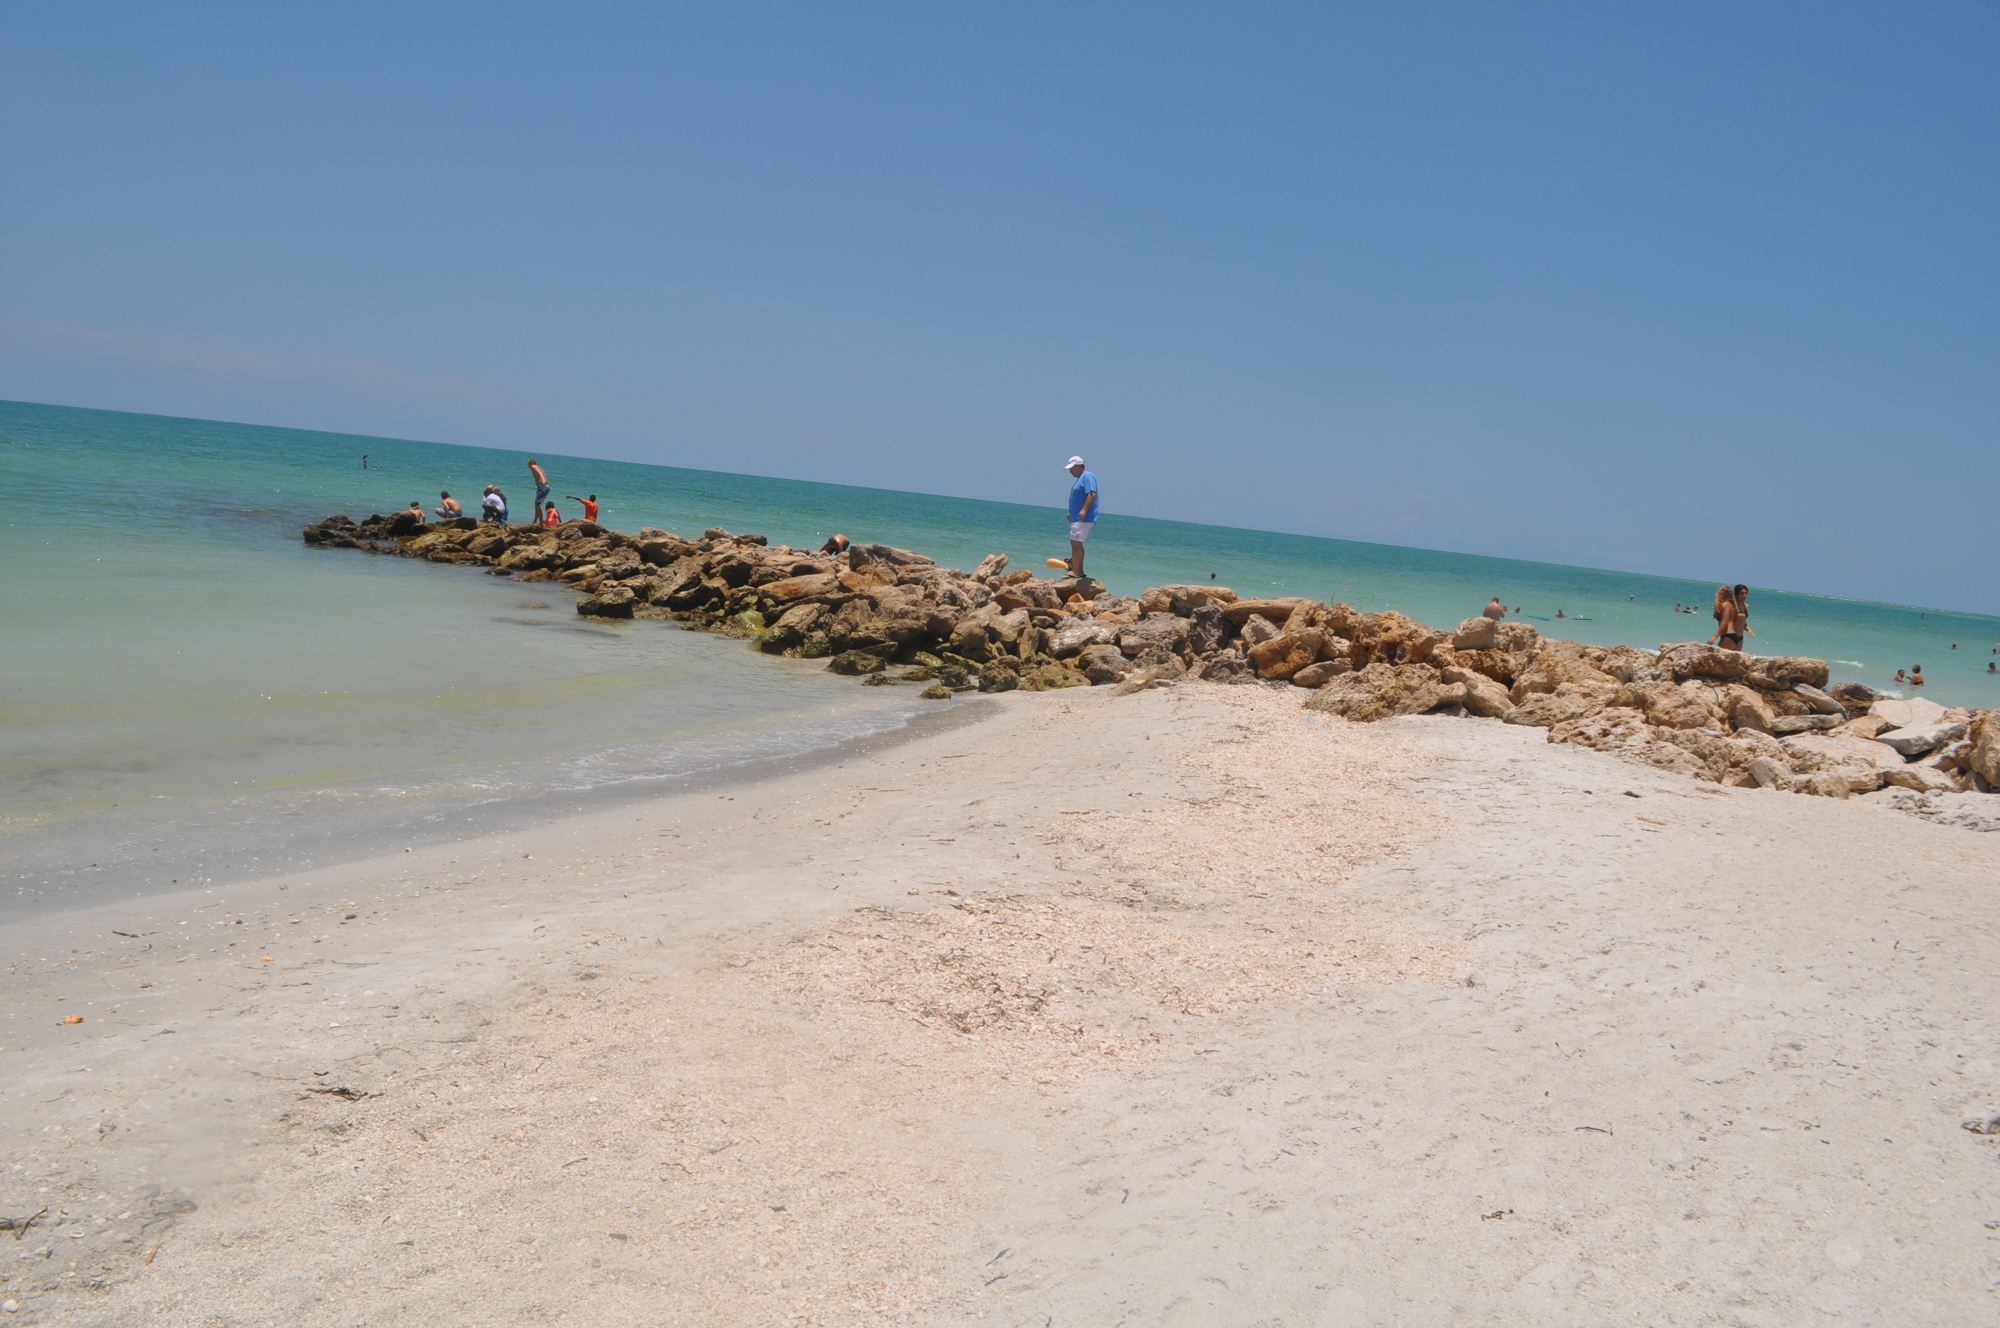 Beachgoers walk along an exposed rock jetty on Lido Key that was submerged in sand last year.